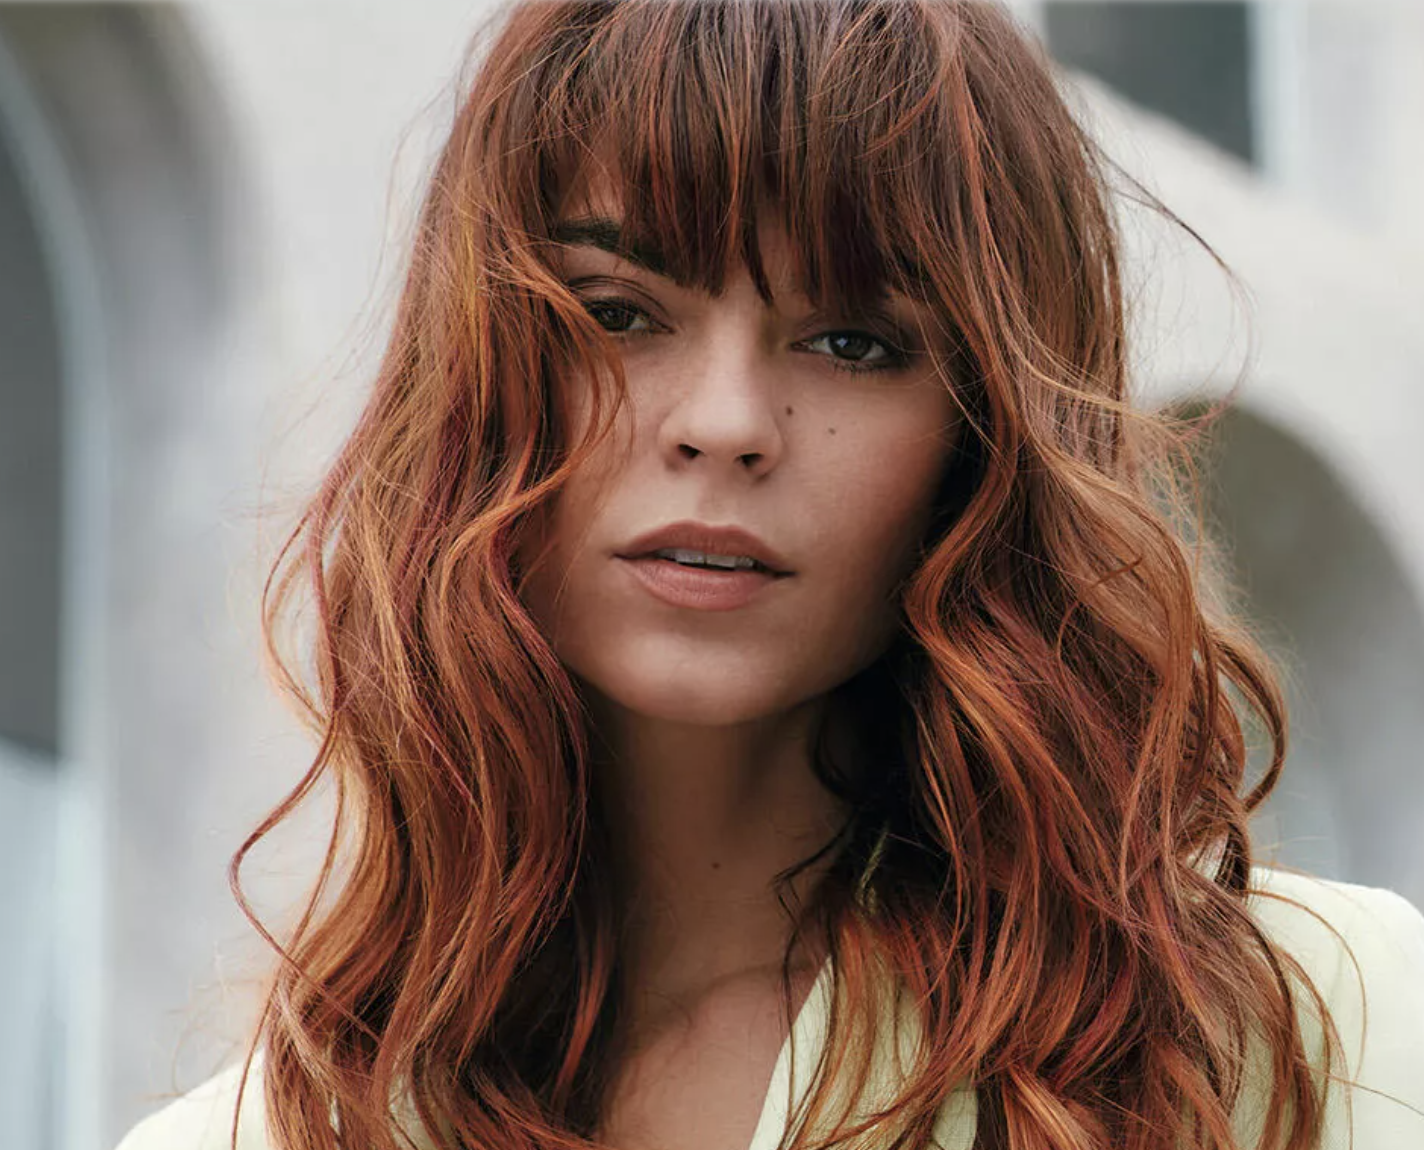 Get The Look: Wella Professionals Shadow Lights Cinnamon Red - Bangstyle -  House of Hair Inspiration